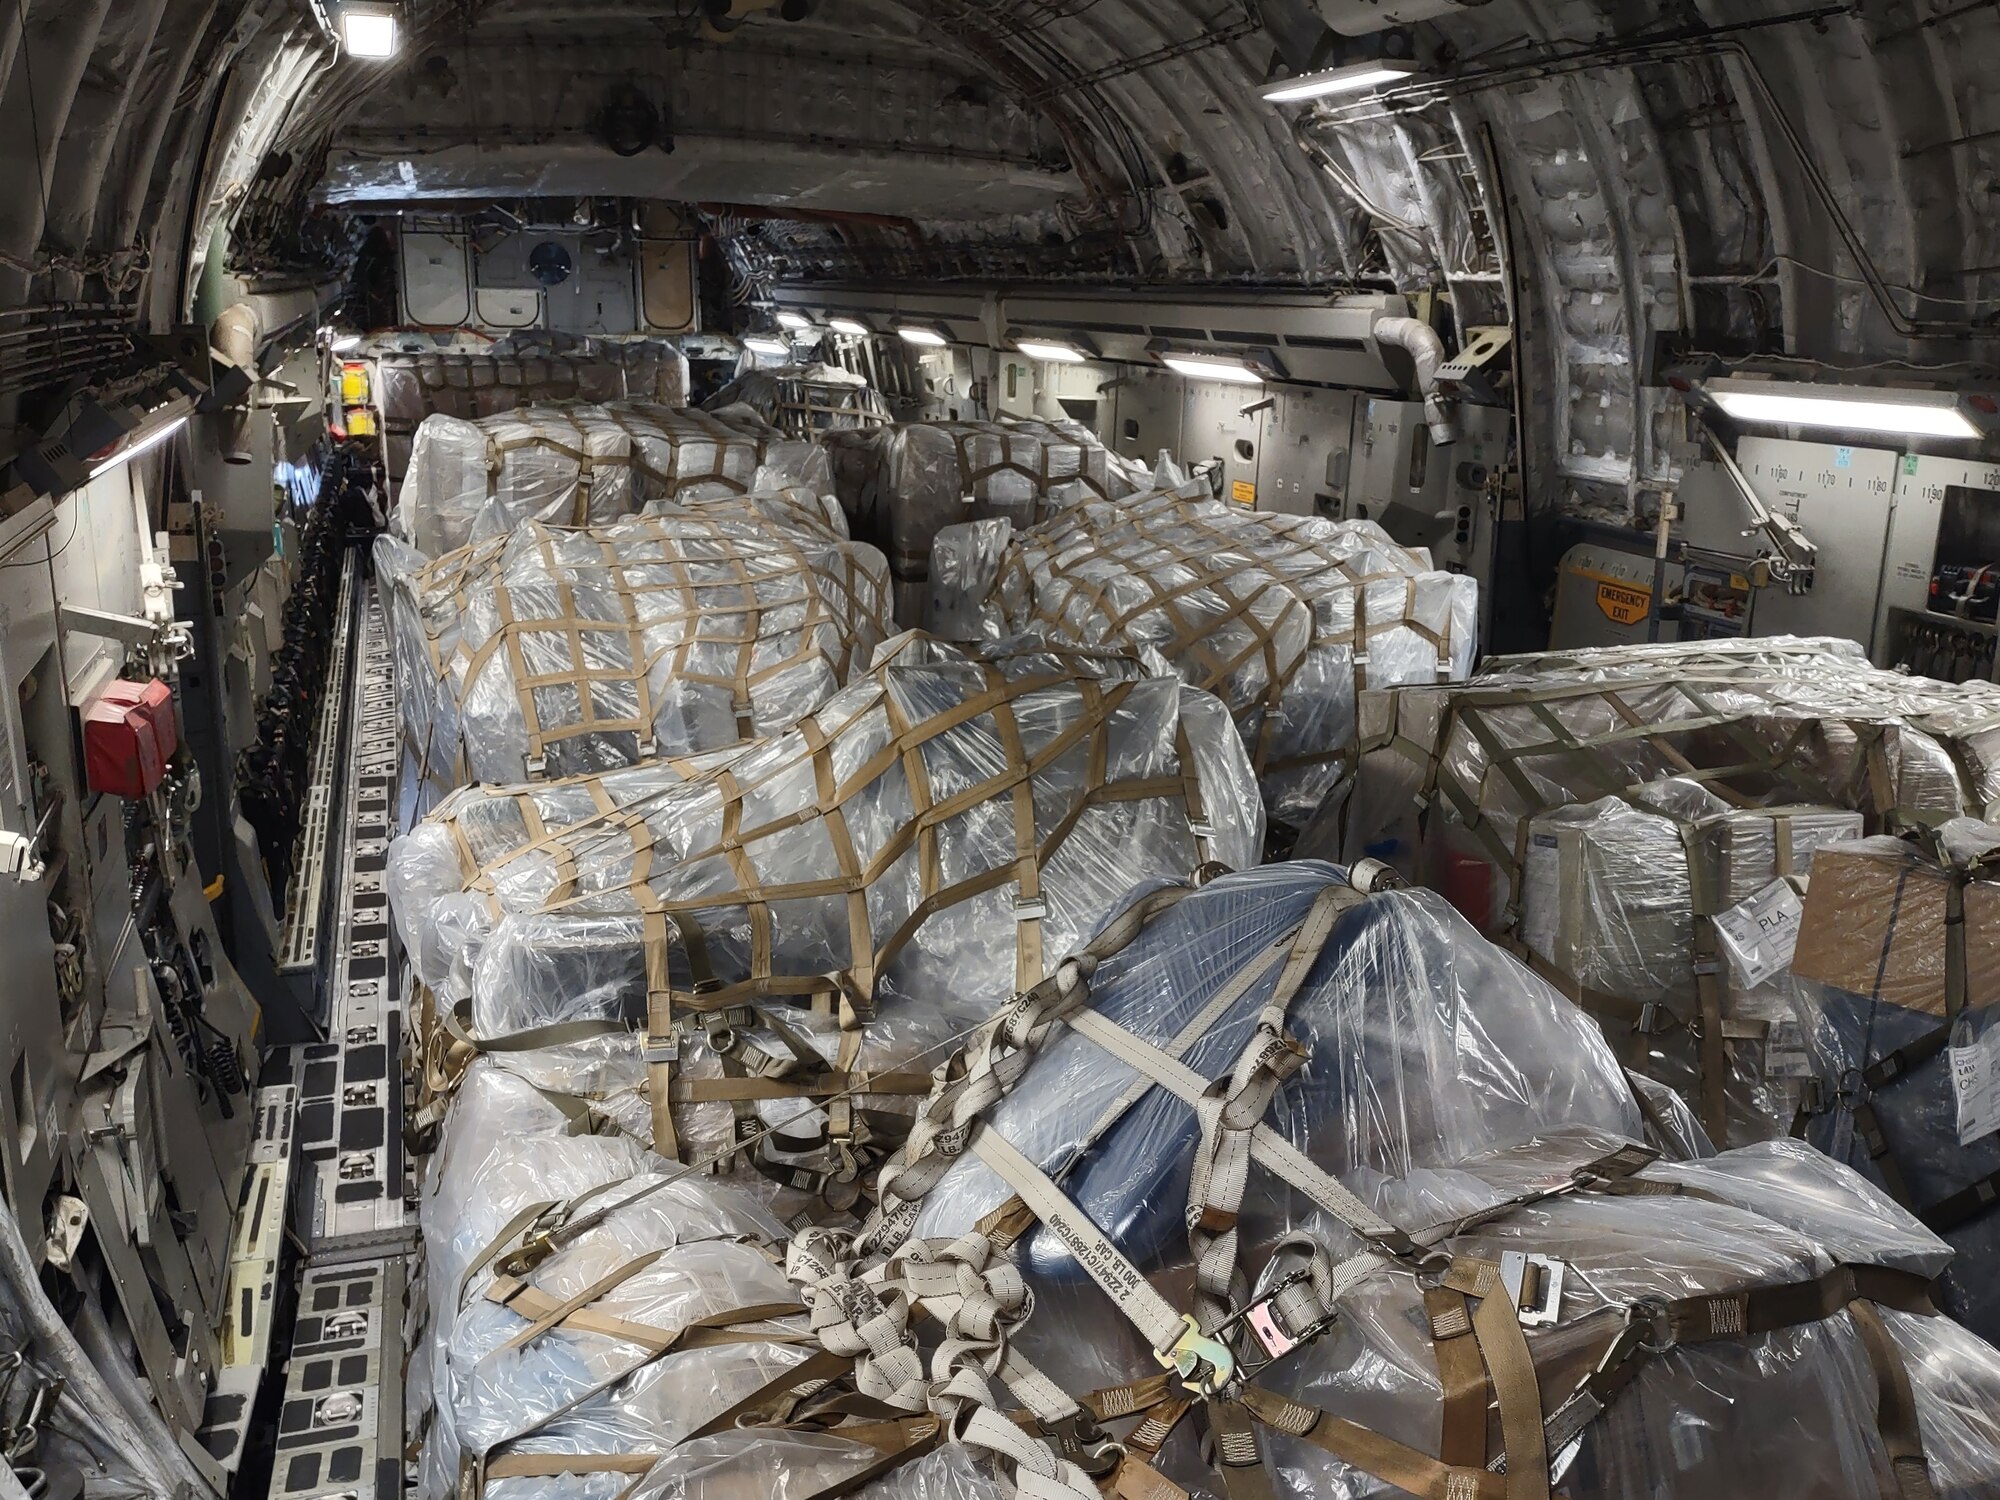 Over 27 tons of donated humanitarian cargo is pictured loaded onto 16 aircraft pallets - each the size of four standard pallets - in the cargo bay of a C-17 Globemaster III aircraft from Joint Base Charleston, S.C., Feb. 13, 2022. Air Force Reserve Citizen Airmen from the 315th Airlift Wing delivered the cargo to Soto Cano Air Base, Honduras, as part of a combined crew training and humanitarian delivery mission, where it will be distributed by Honduran outreach organizations. (U.S. Air Force photo by Capt. Justin Clark)